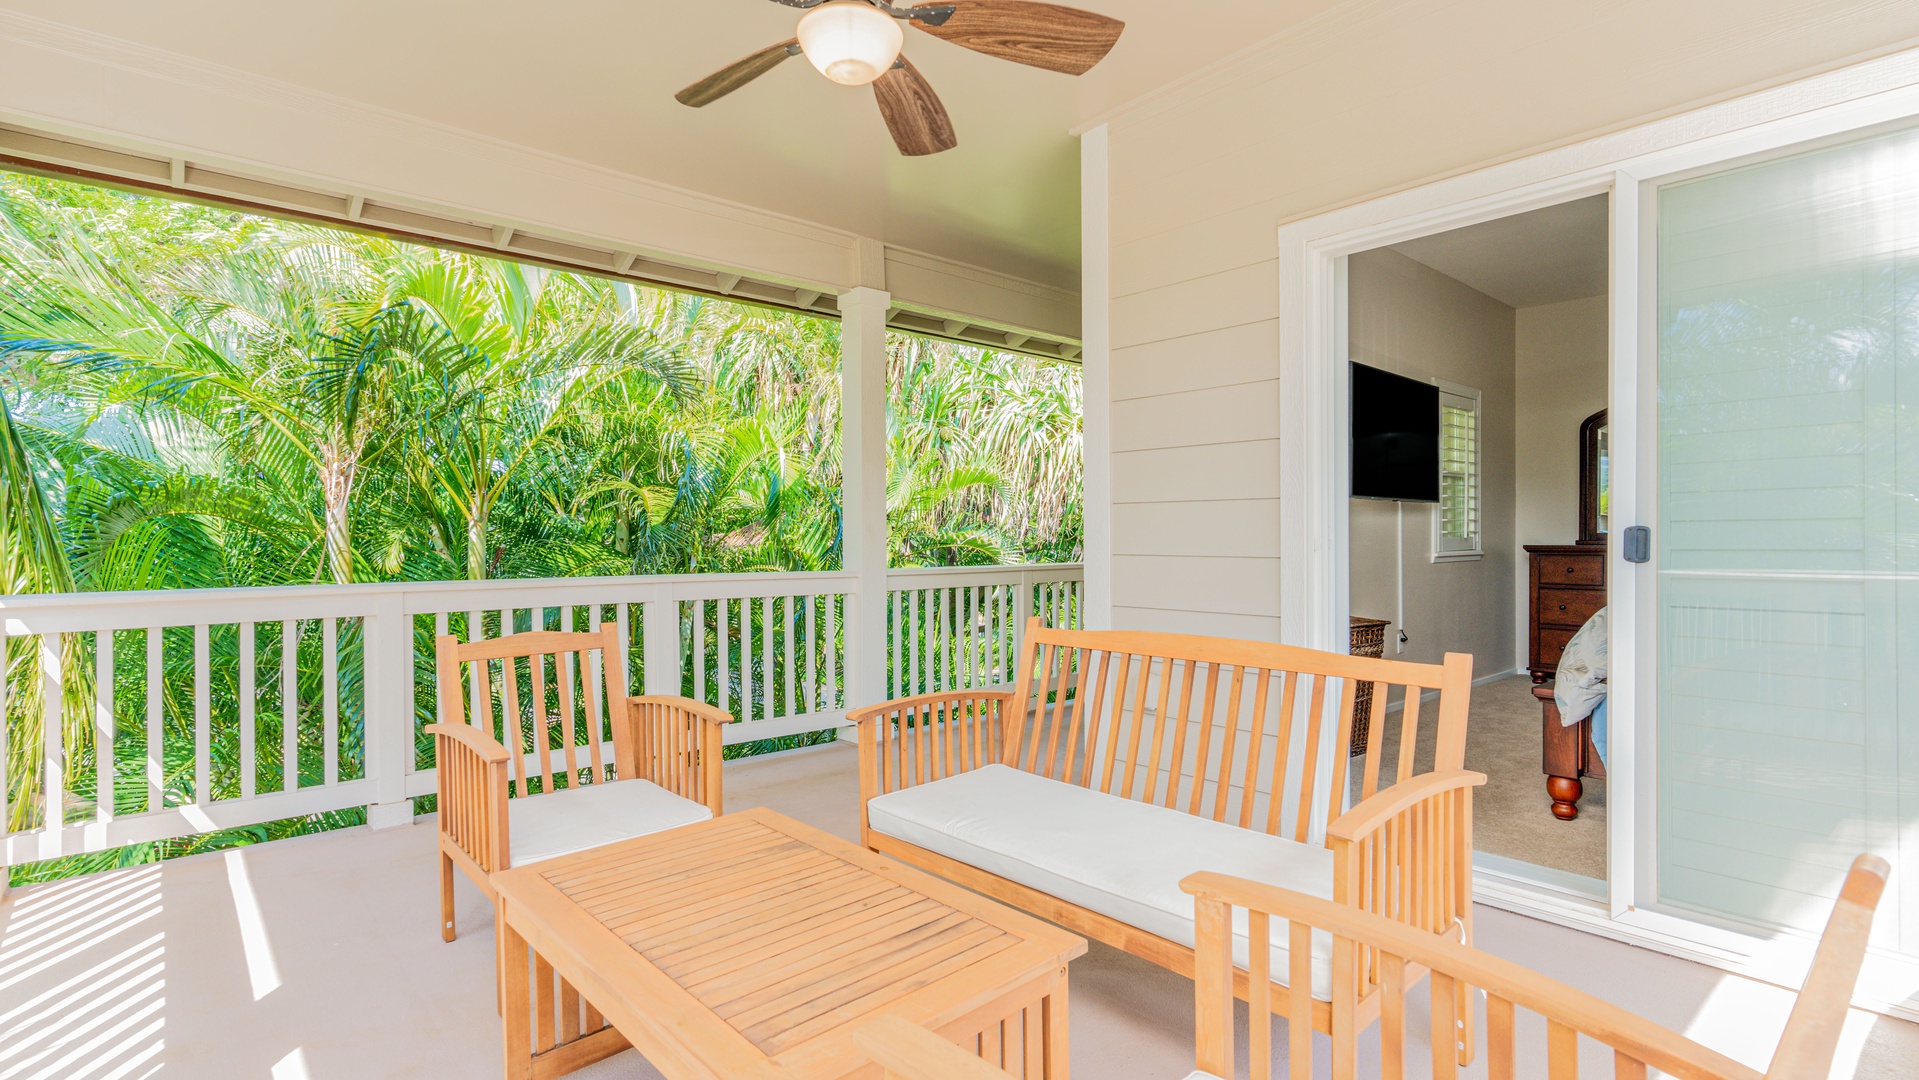 Kapolei Vacation Rentals, Coconut Plantation 1234-2 - The lanai is surrounded by tropical plants.